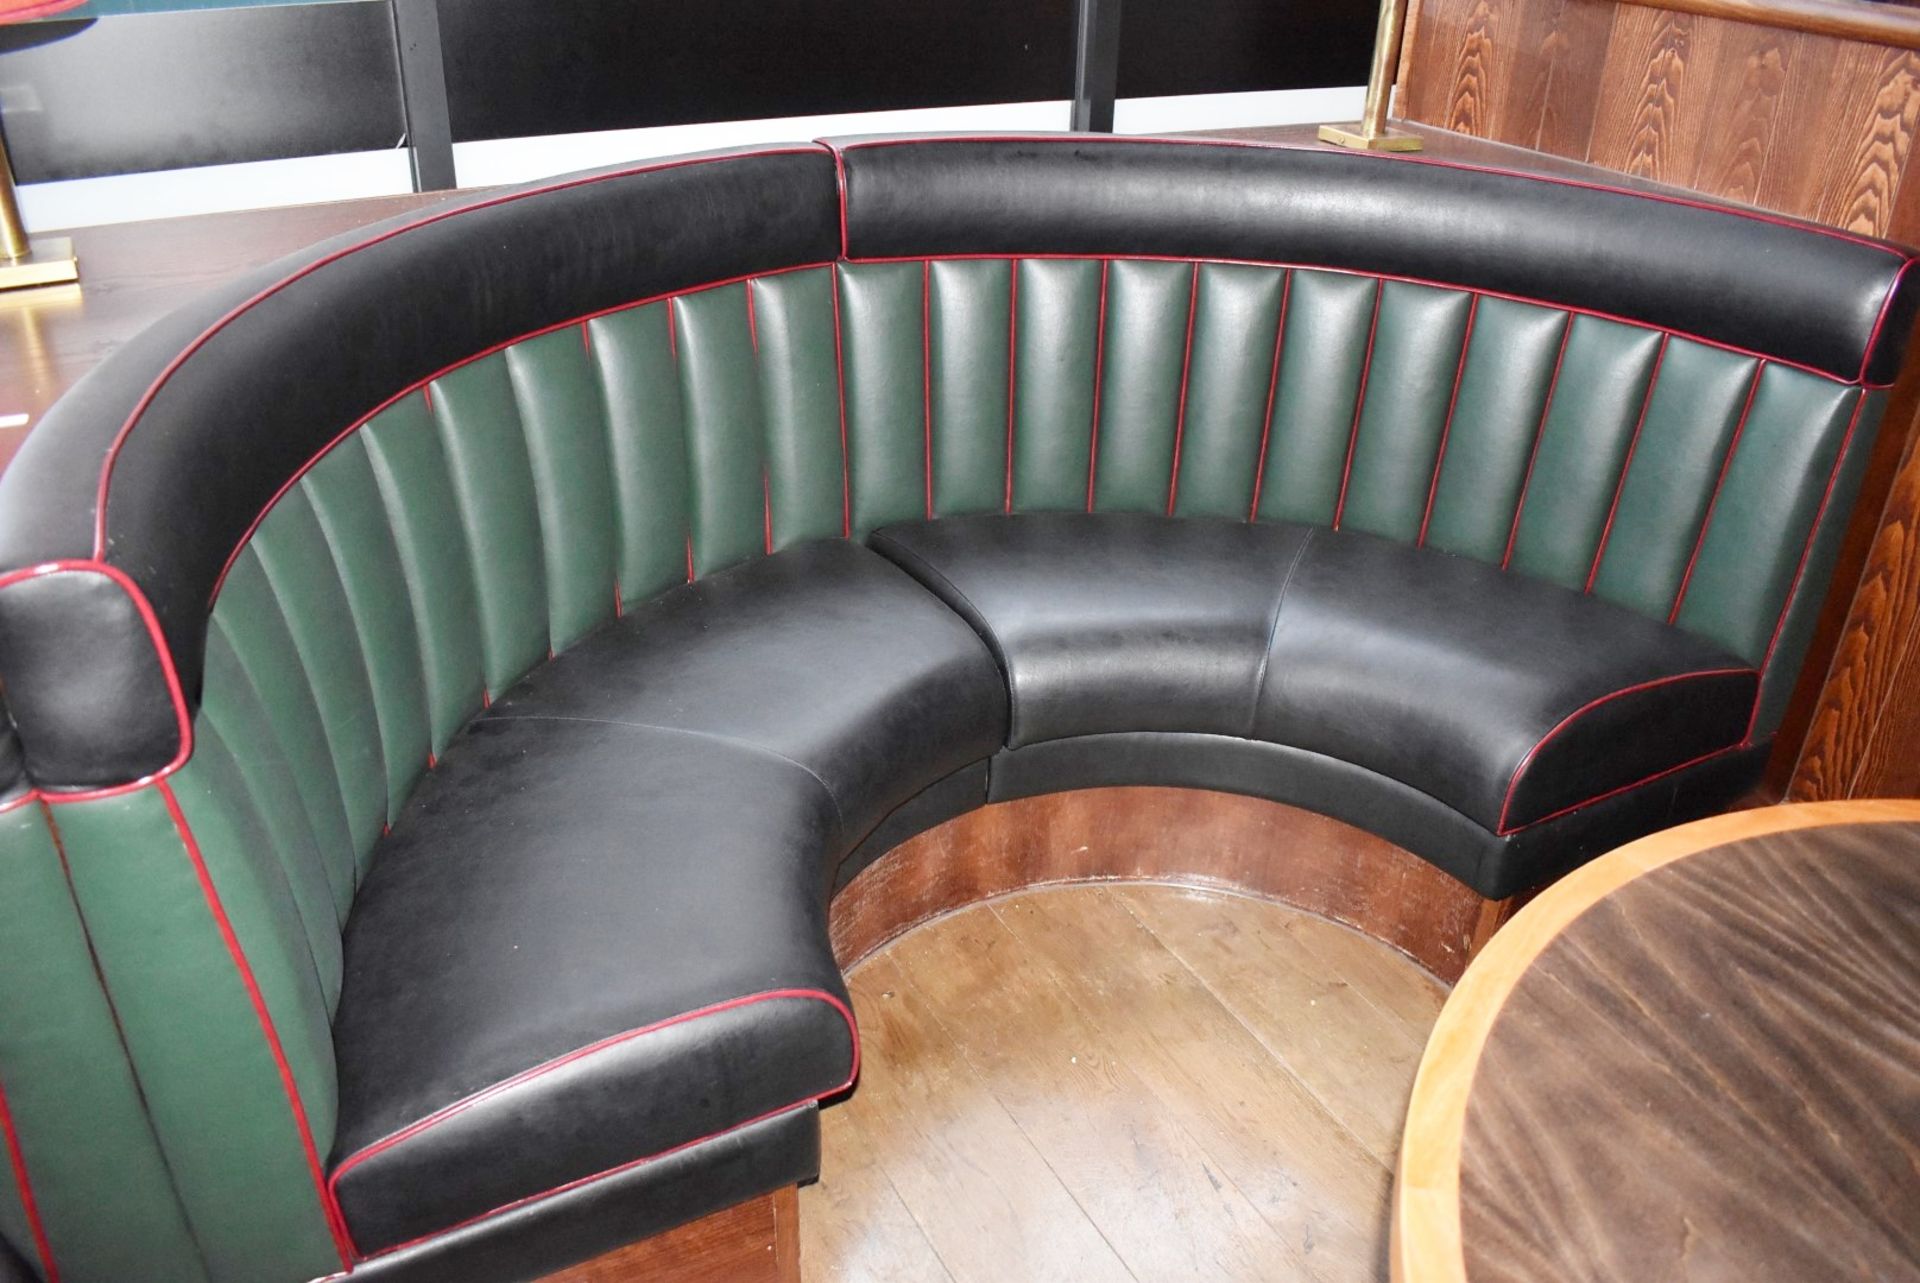 2 x Restaurant C-Shape 4 Person Seating Booth - Green and Black Vertical Fluted Back Upholstery - Image 4 of 13